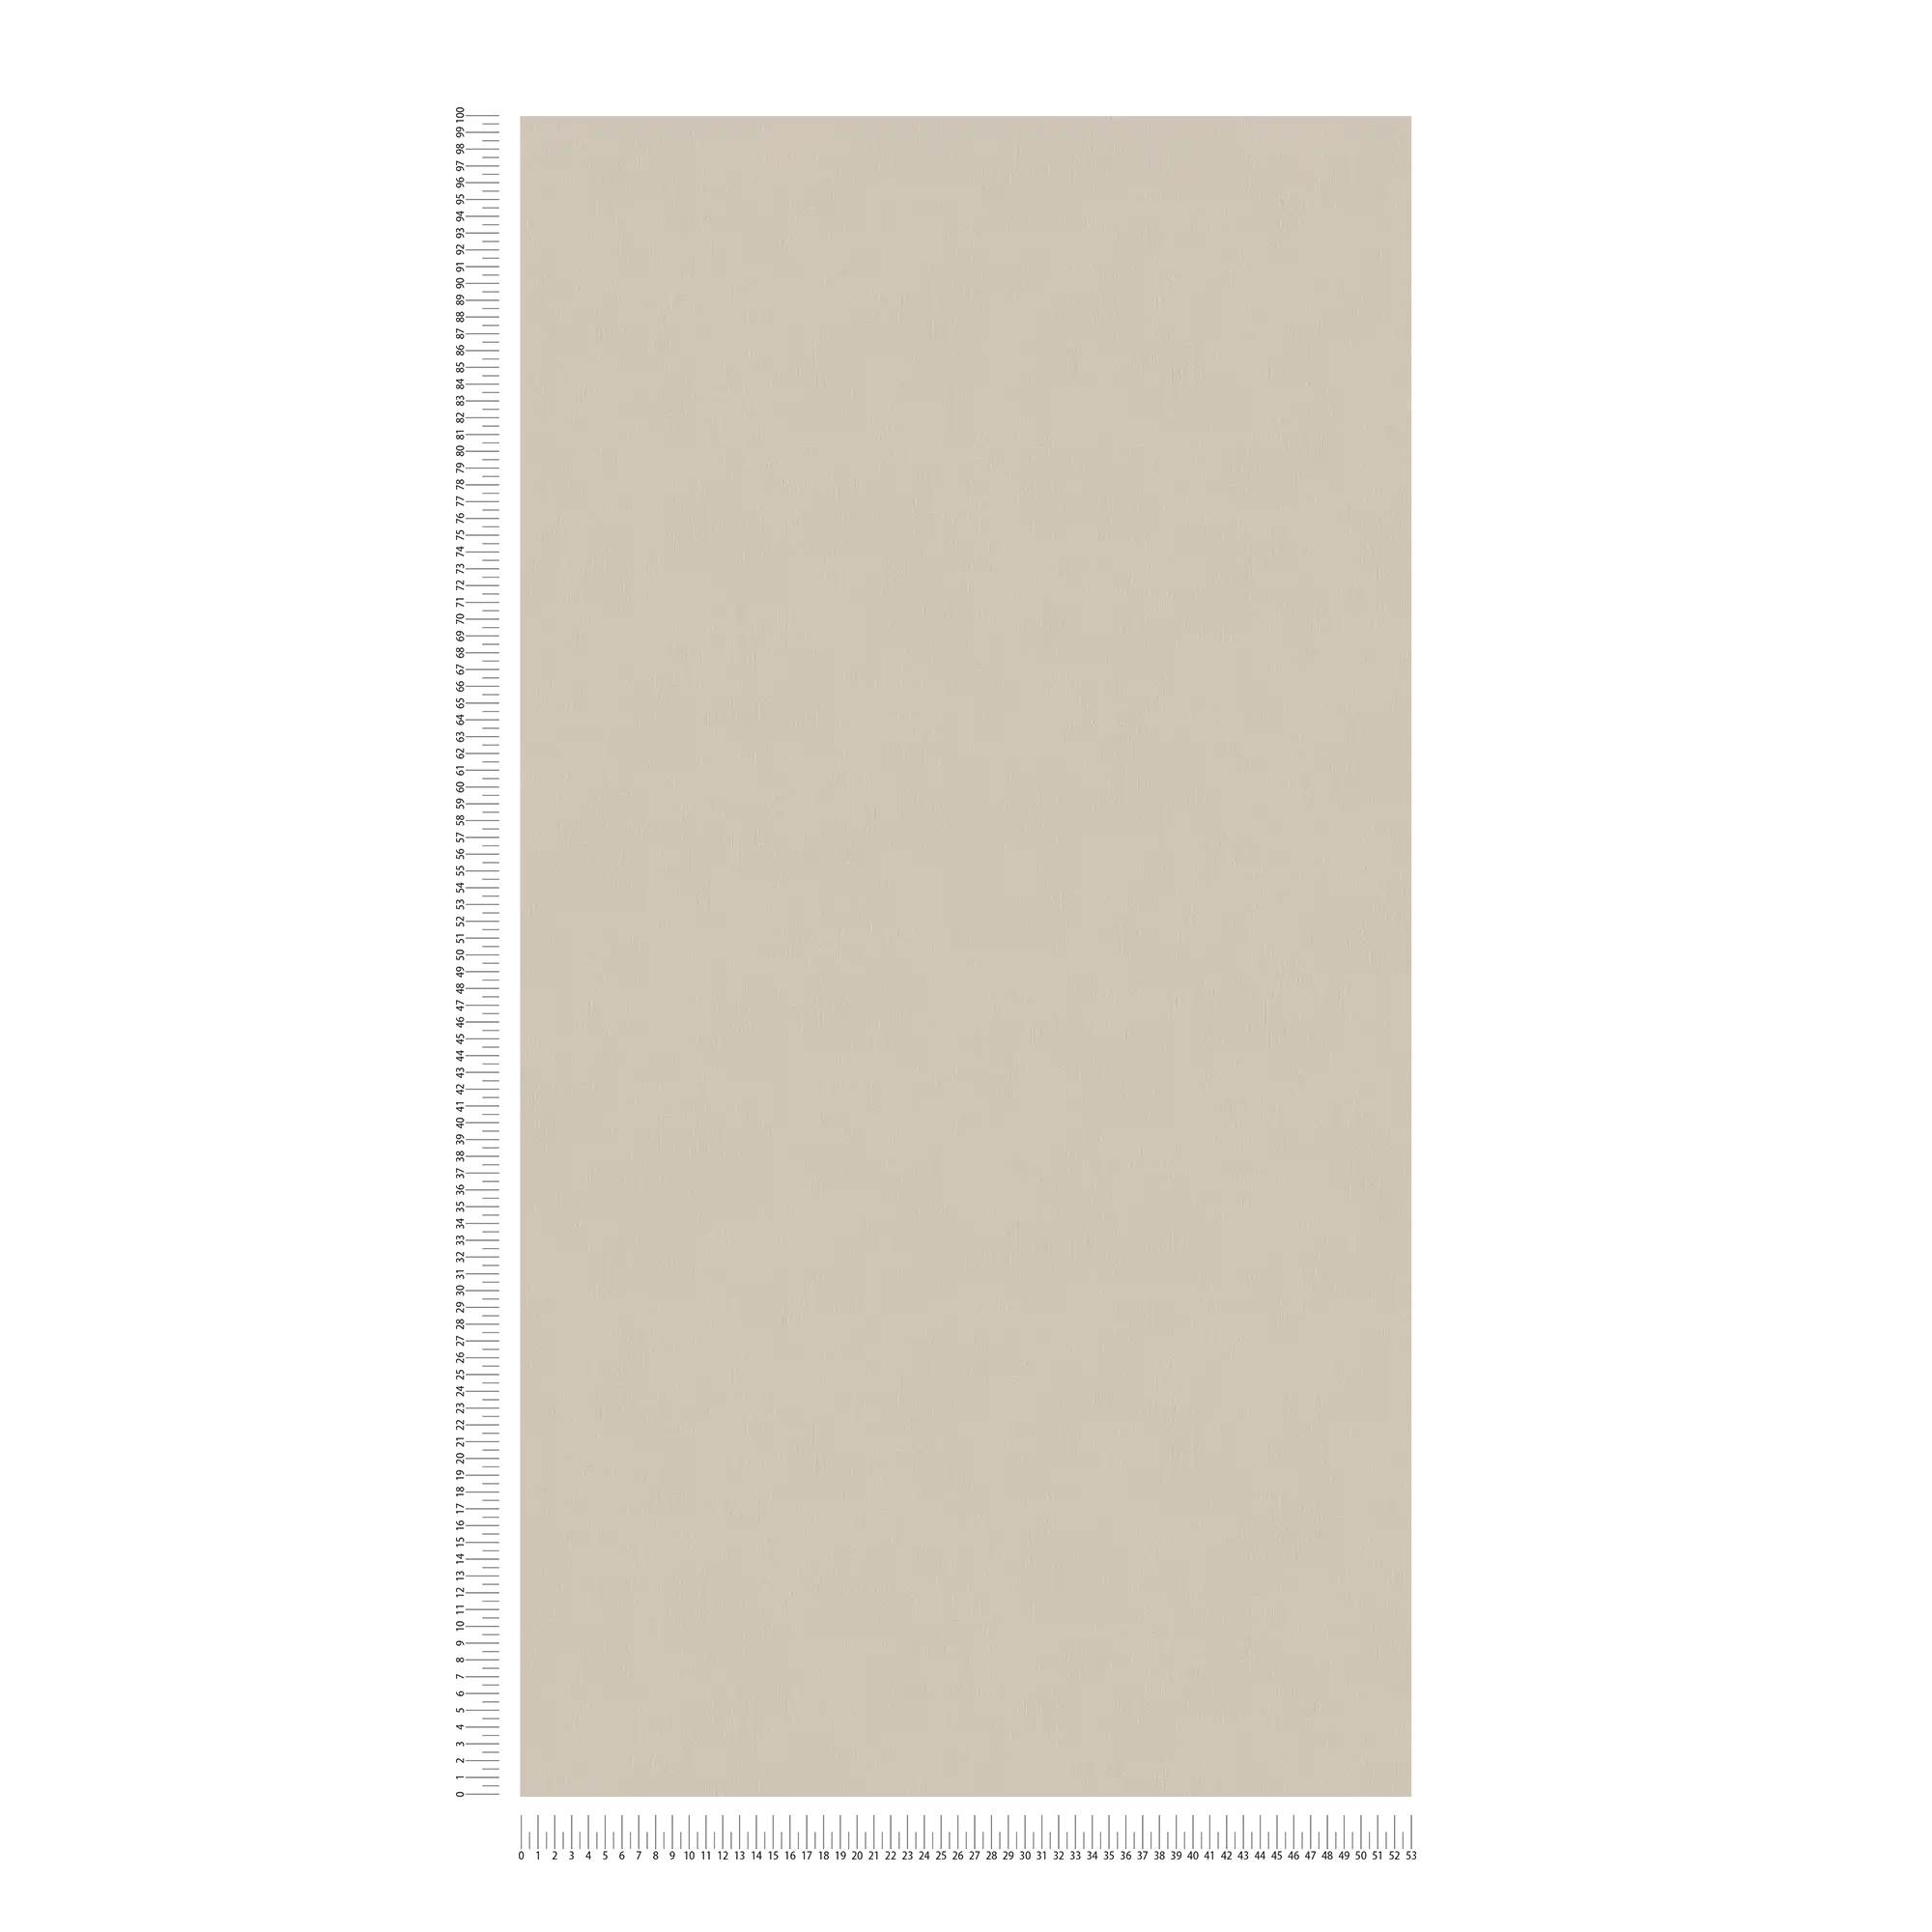             Non-woven wallpaper grey-brown light with smooth surface
        